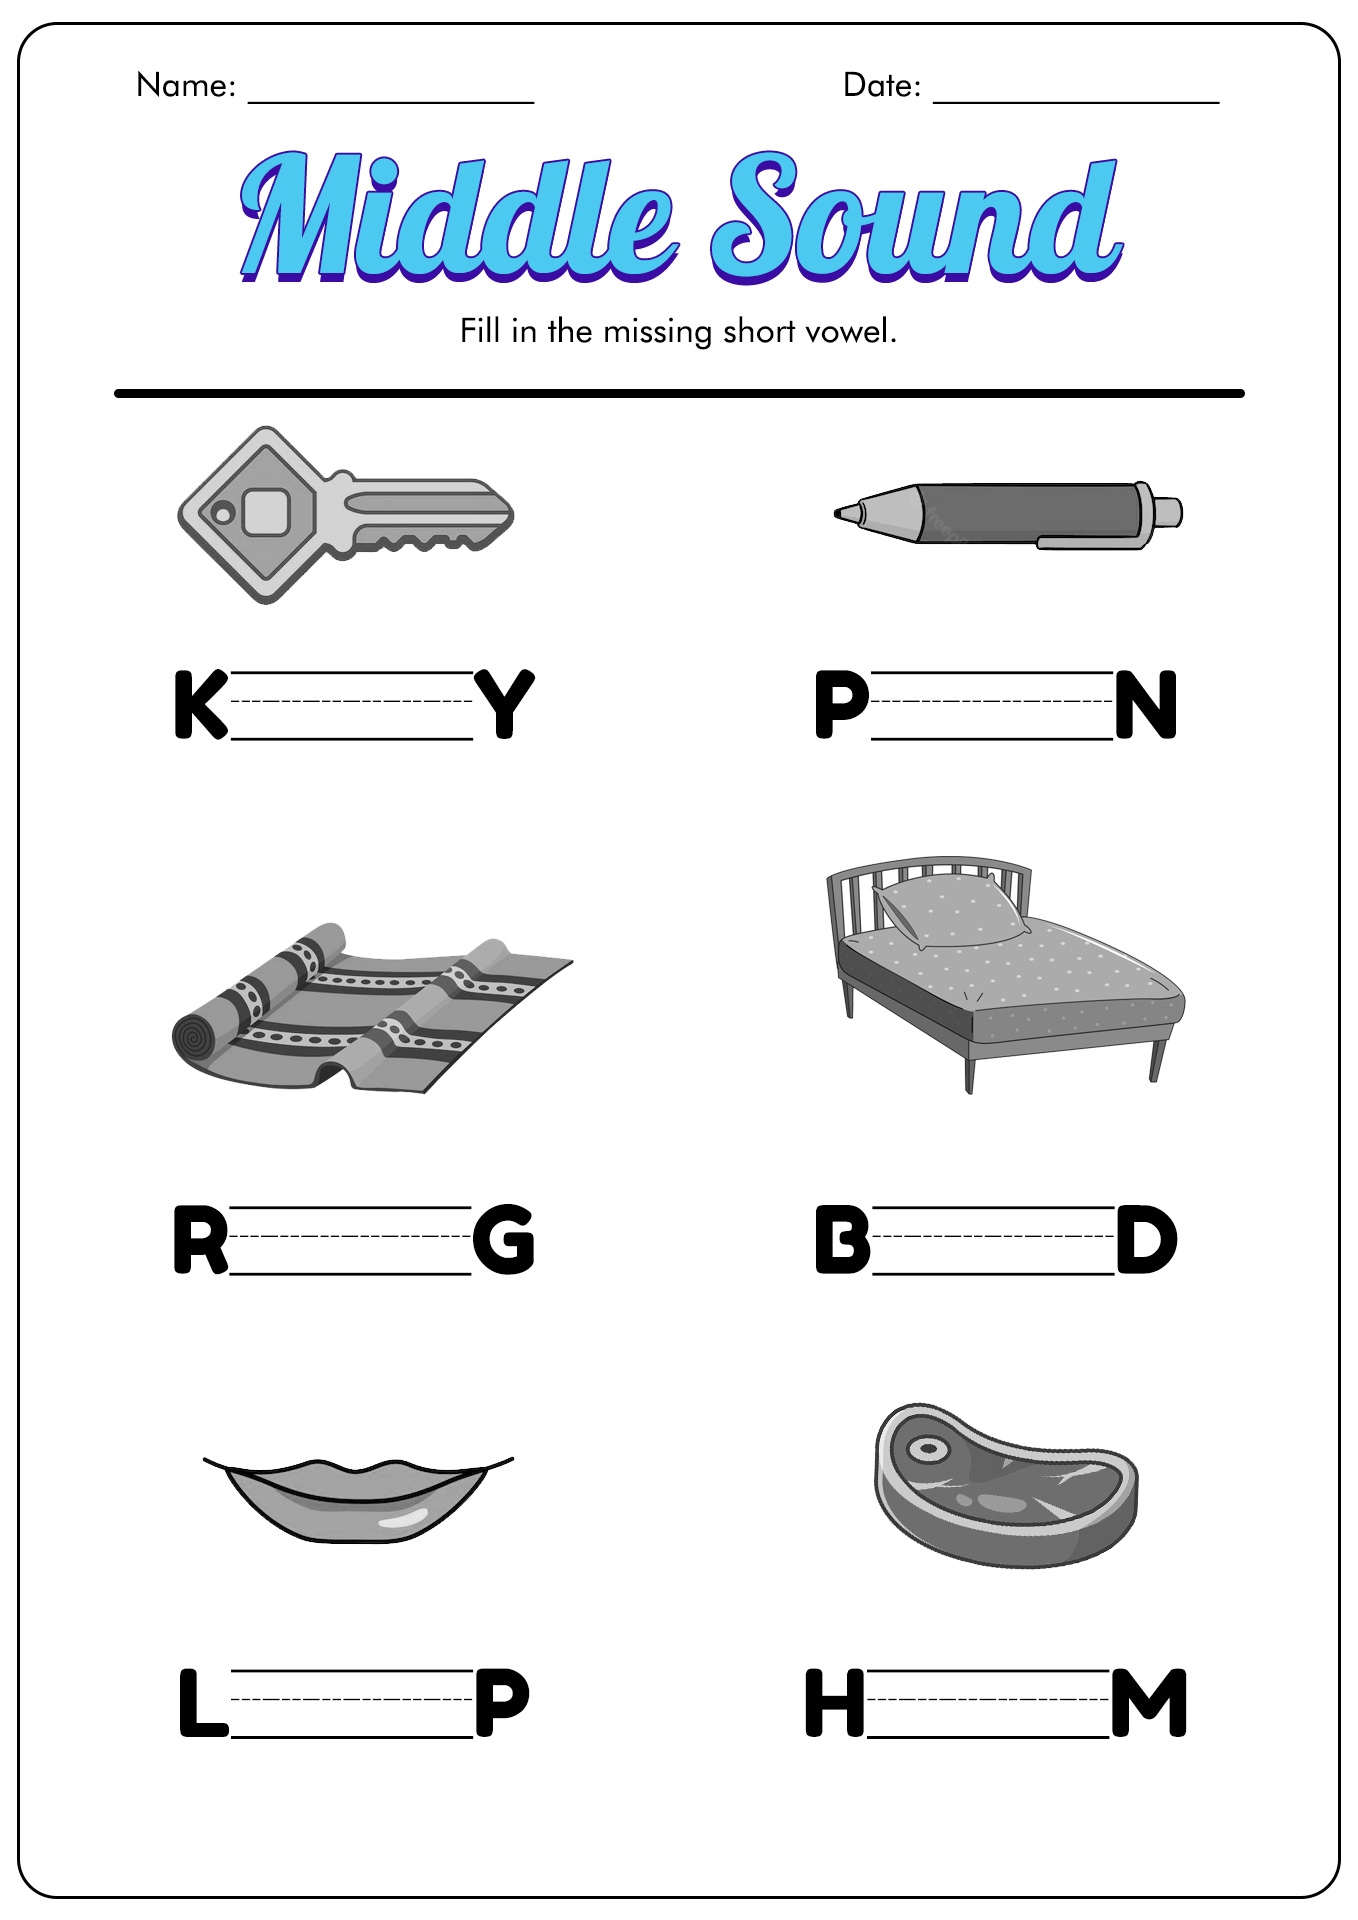 Middle Sound Review Worksheet